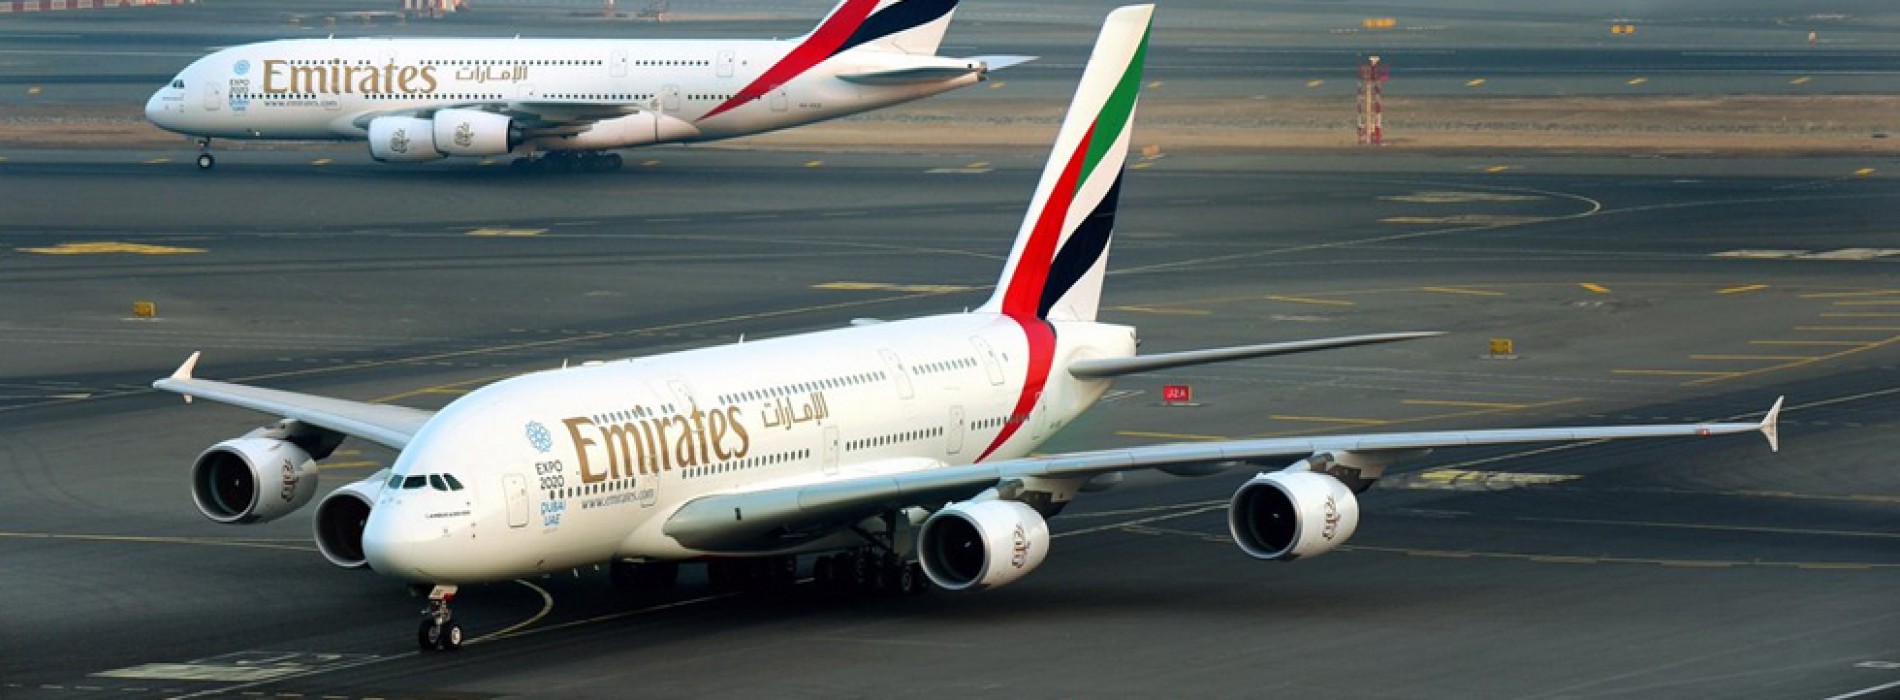 Emirates ends 2017 on a high note reaching fleet and product milestones